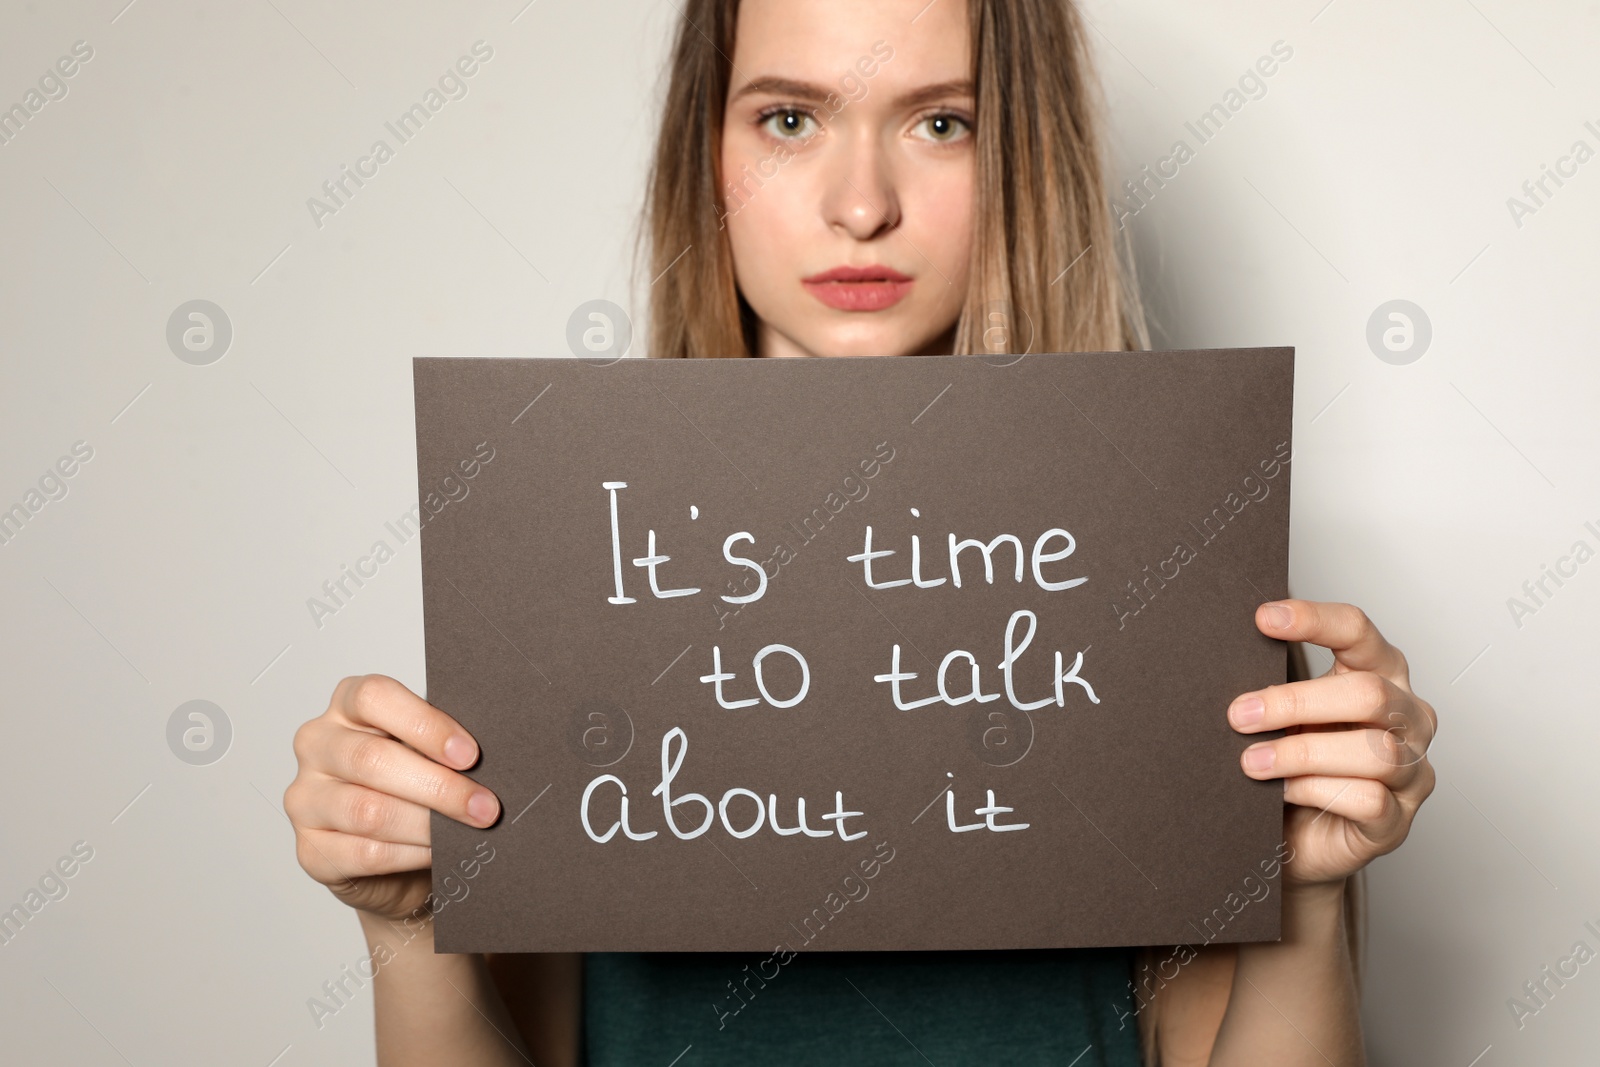 Photo of Young woman holding card with words IT'S TIME TO TALK ABOUT IT against light background